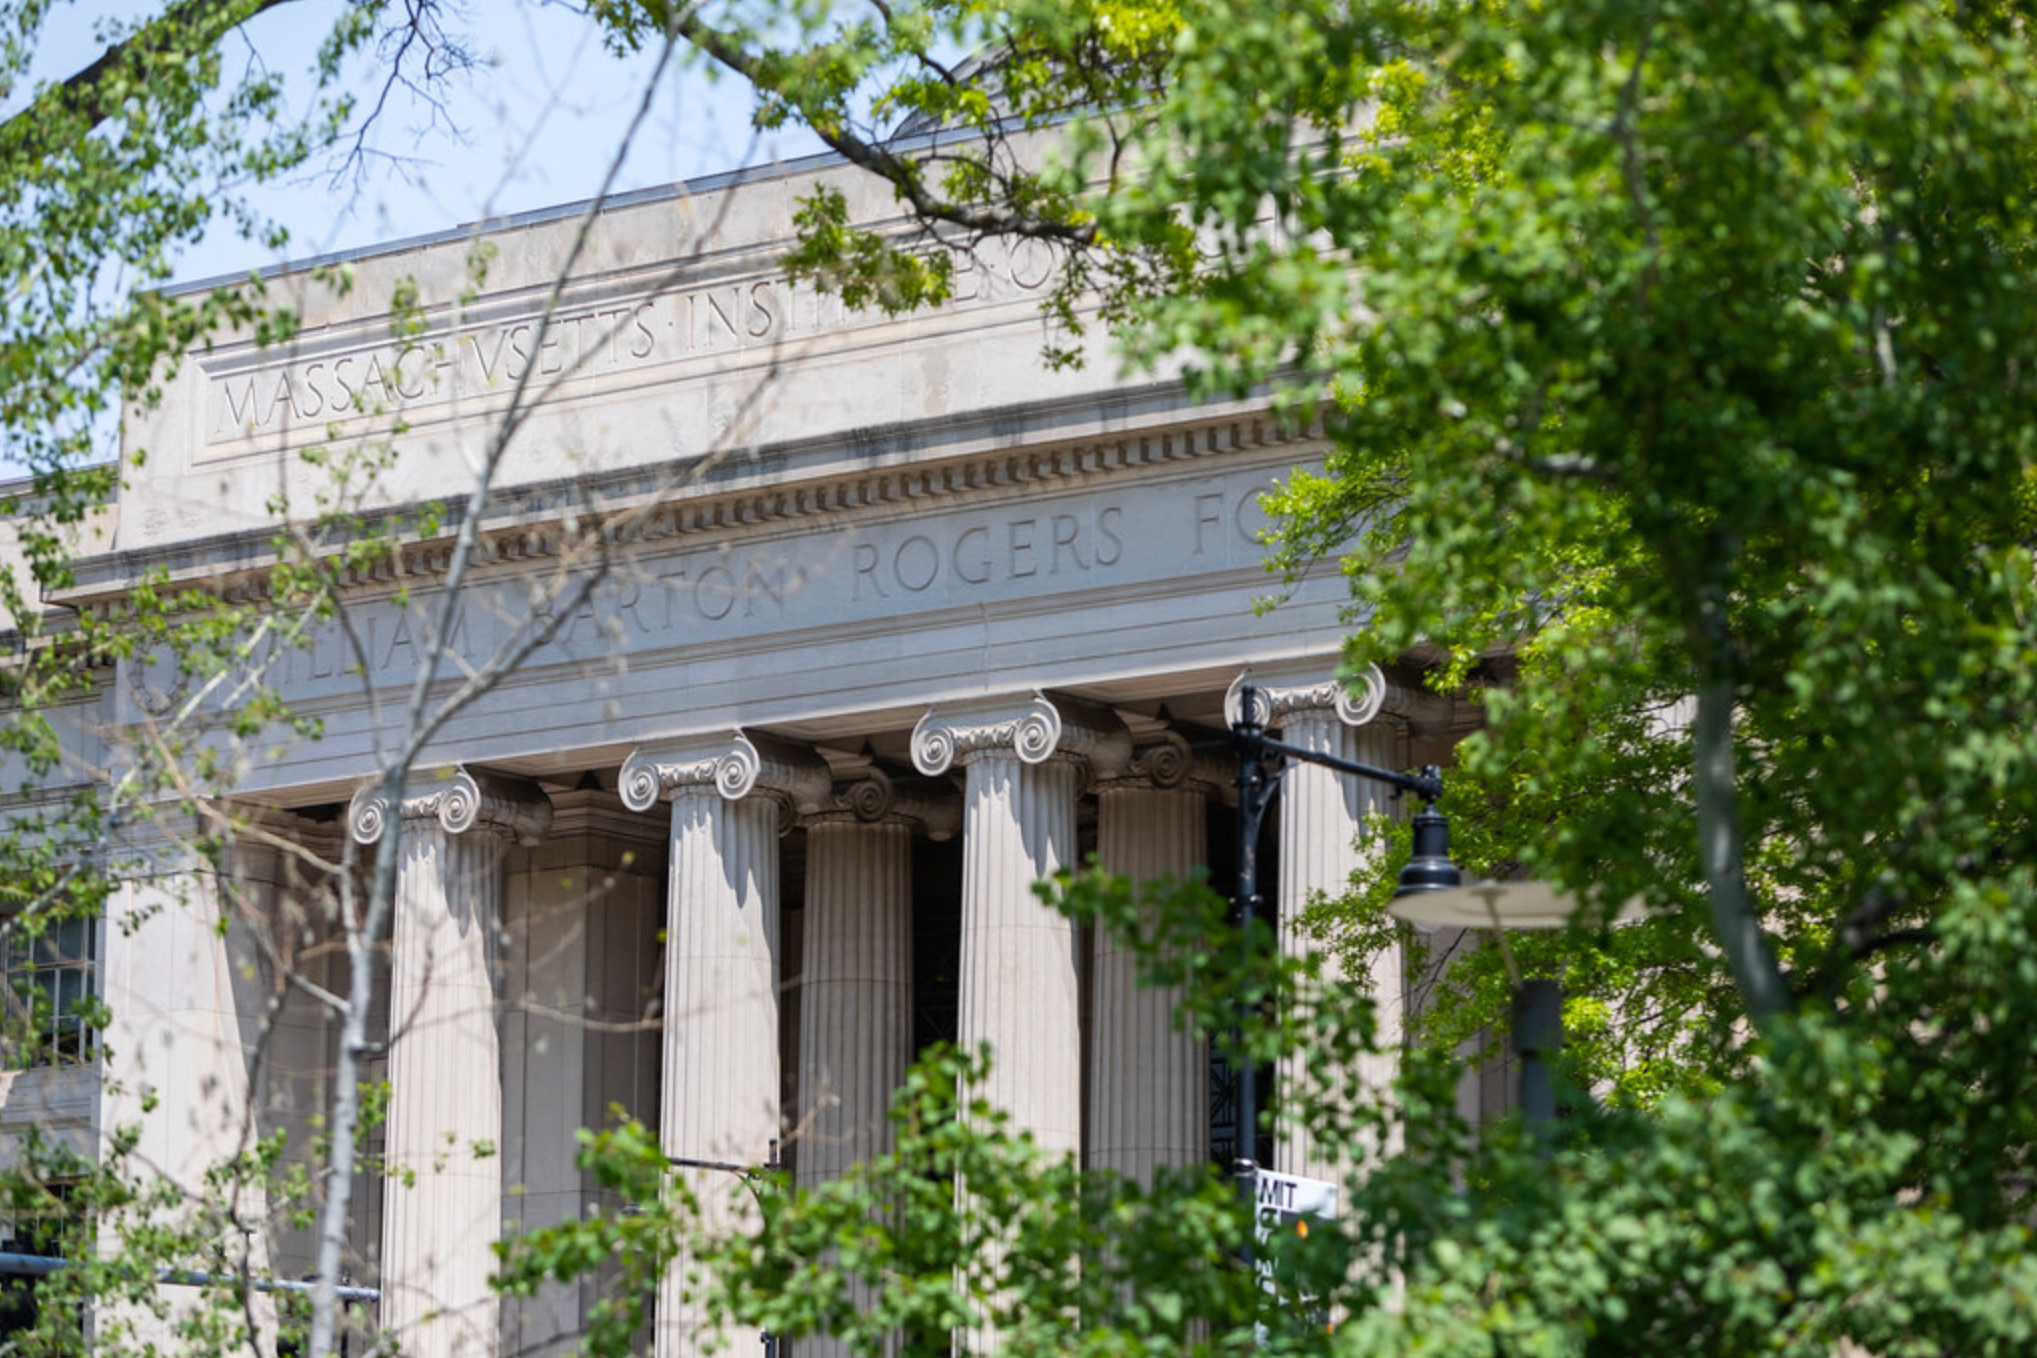 MIT News reports that QS World University Rankings has ranked MIT No. 1 in 11 subjects for 2024